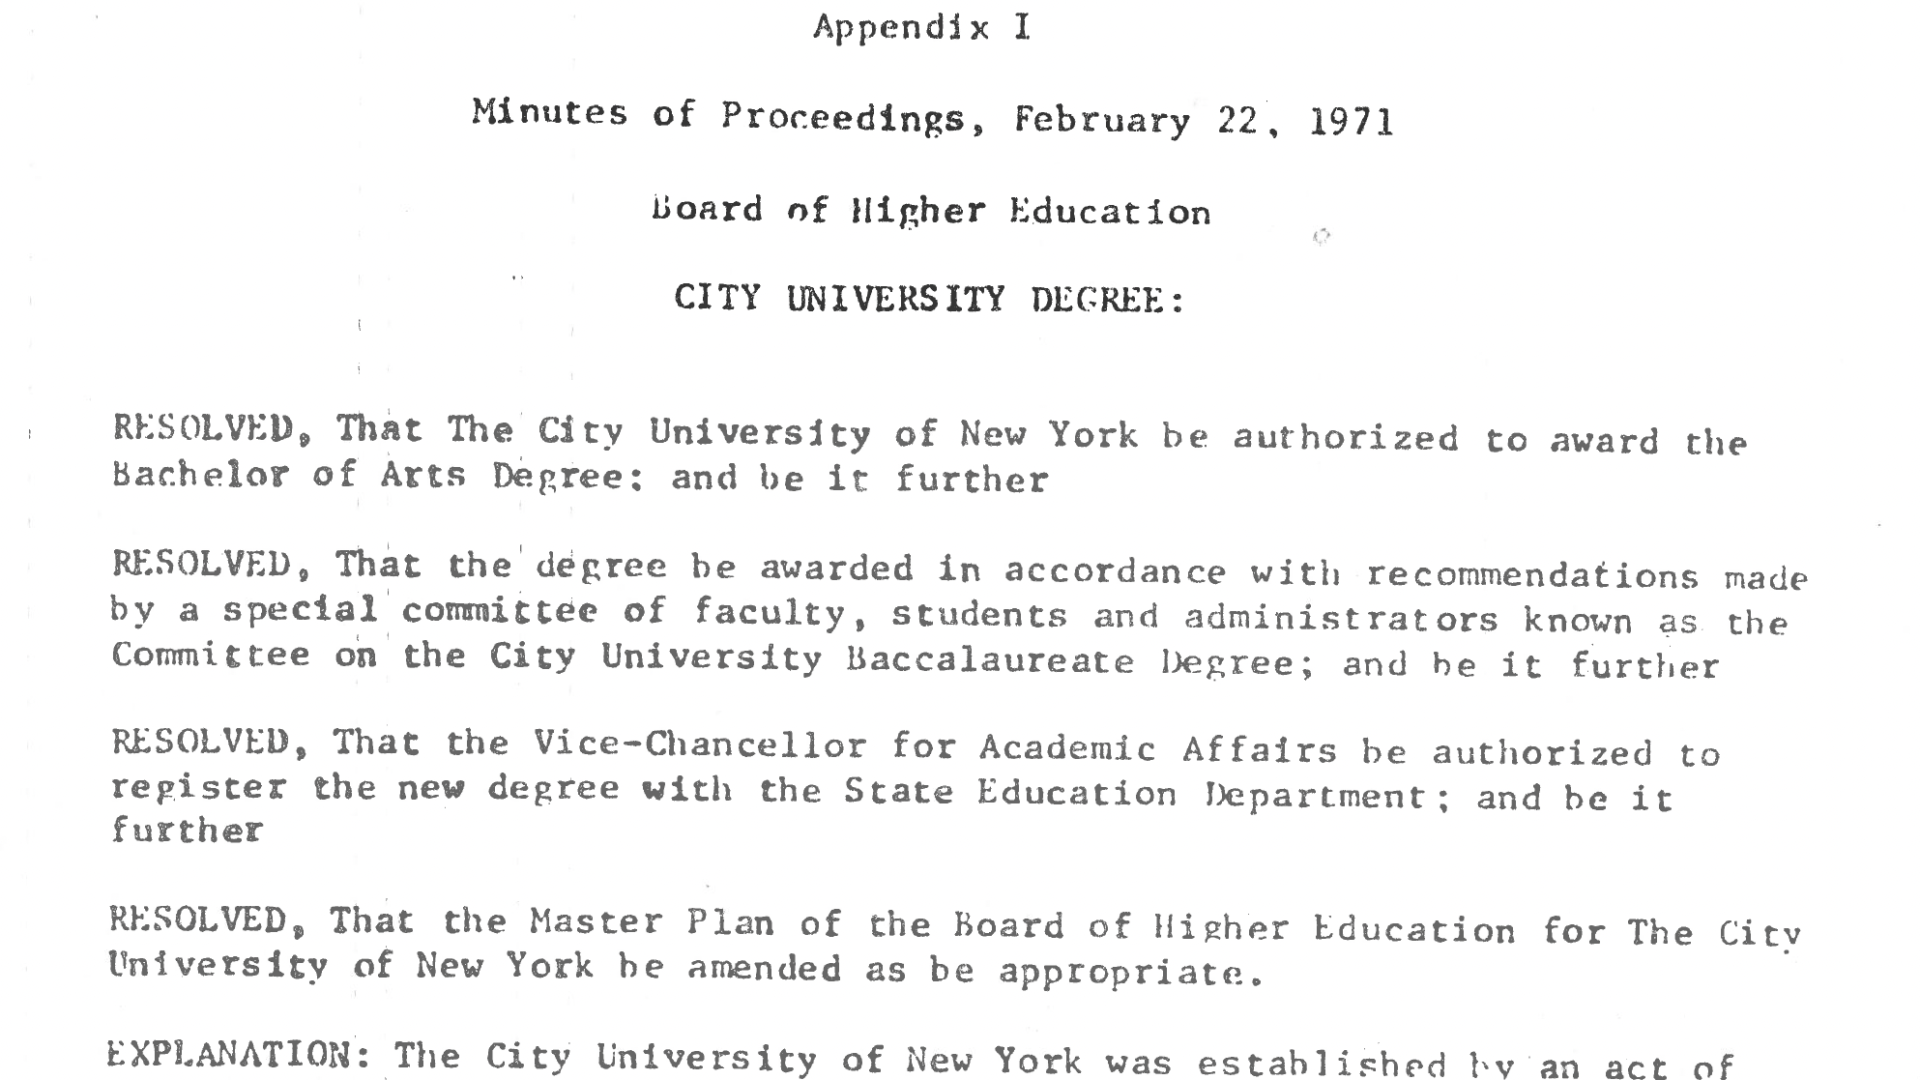 The Board of Higher Education Resolution establish a new CUNY Baccalaureate degree